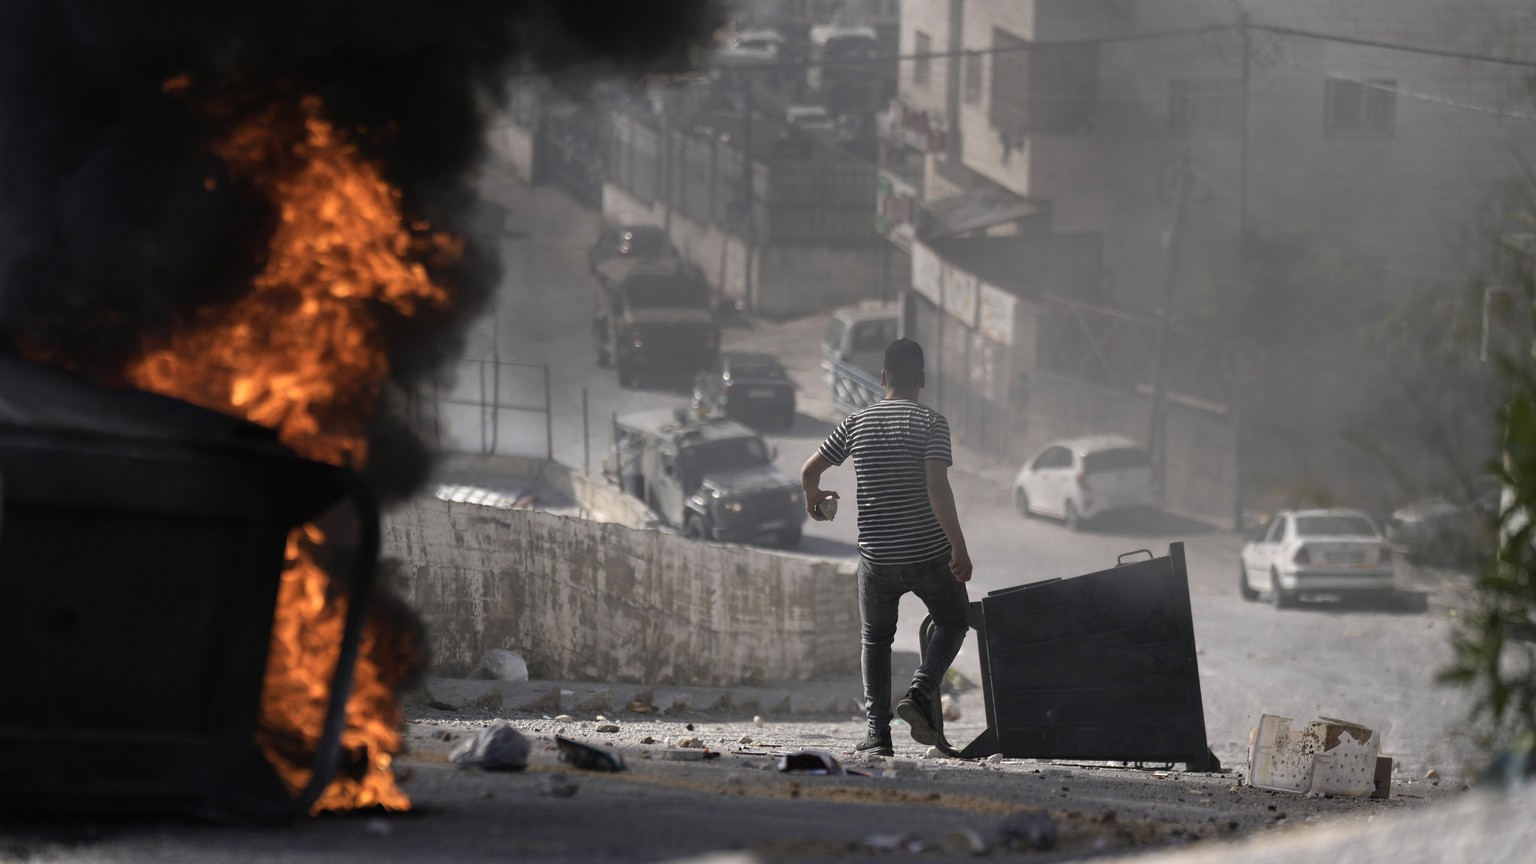 A Palestinian clashes with Israeli forces in the West Bank city of Nablus, during a military operation, Tuesday, May 9, 2023. (AP Photo/Majdi Mohammed)